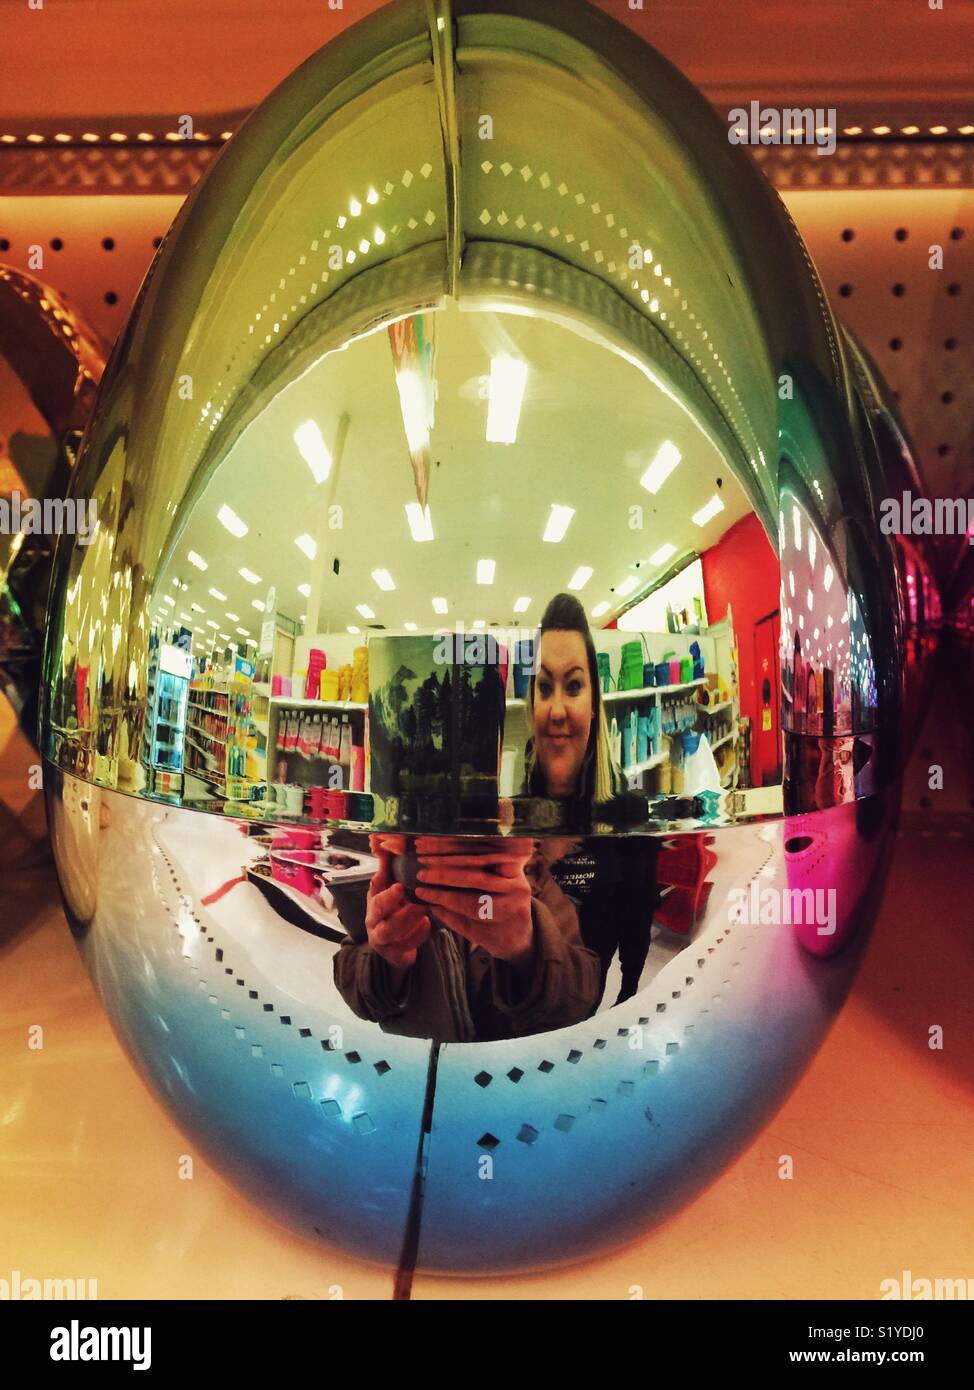 Taking selfies in oversized mirrored easter egg at Target store Stock Photo